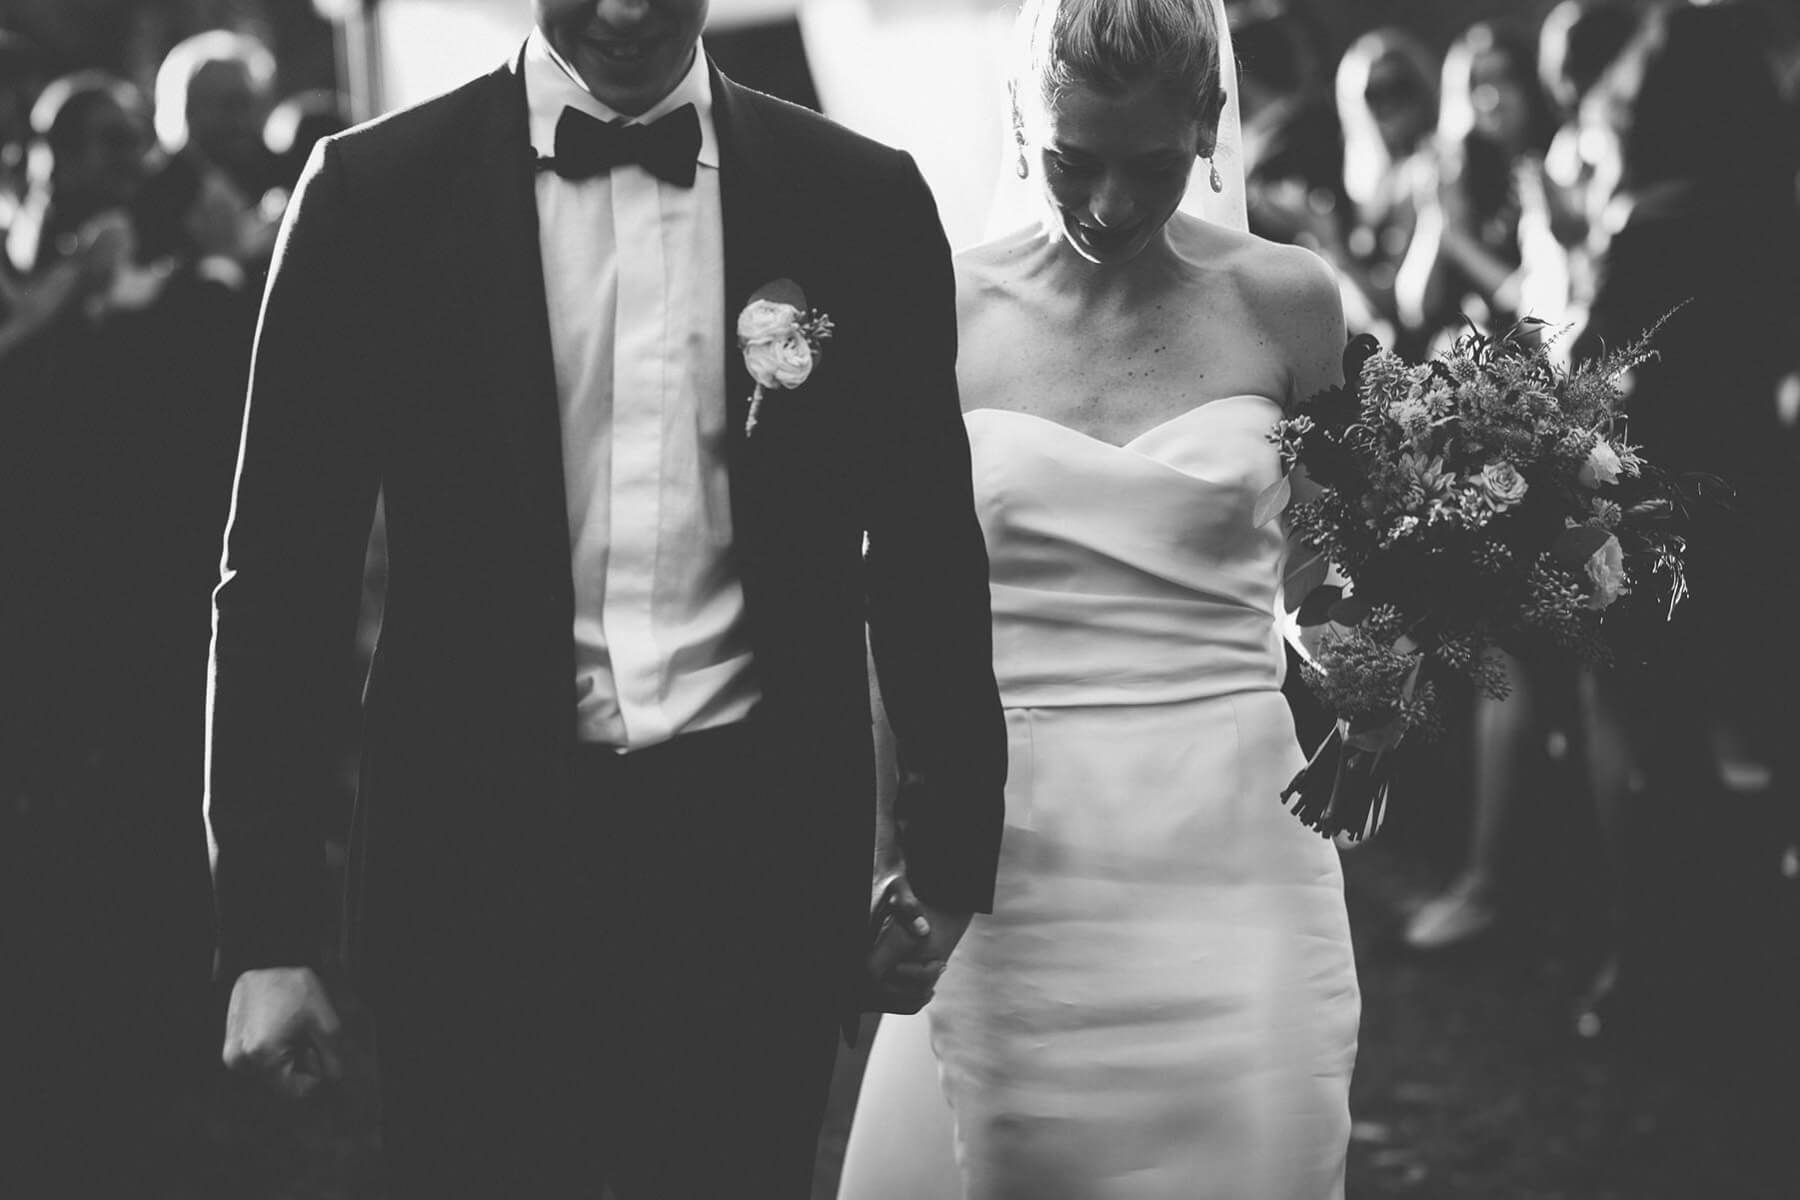 Black and white photo of newly married couple walking down aisle while bride holds wedding bouqet